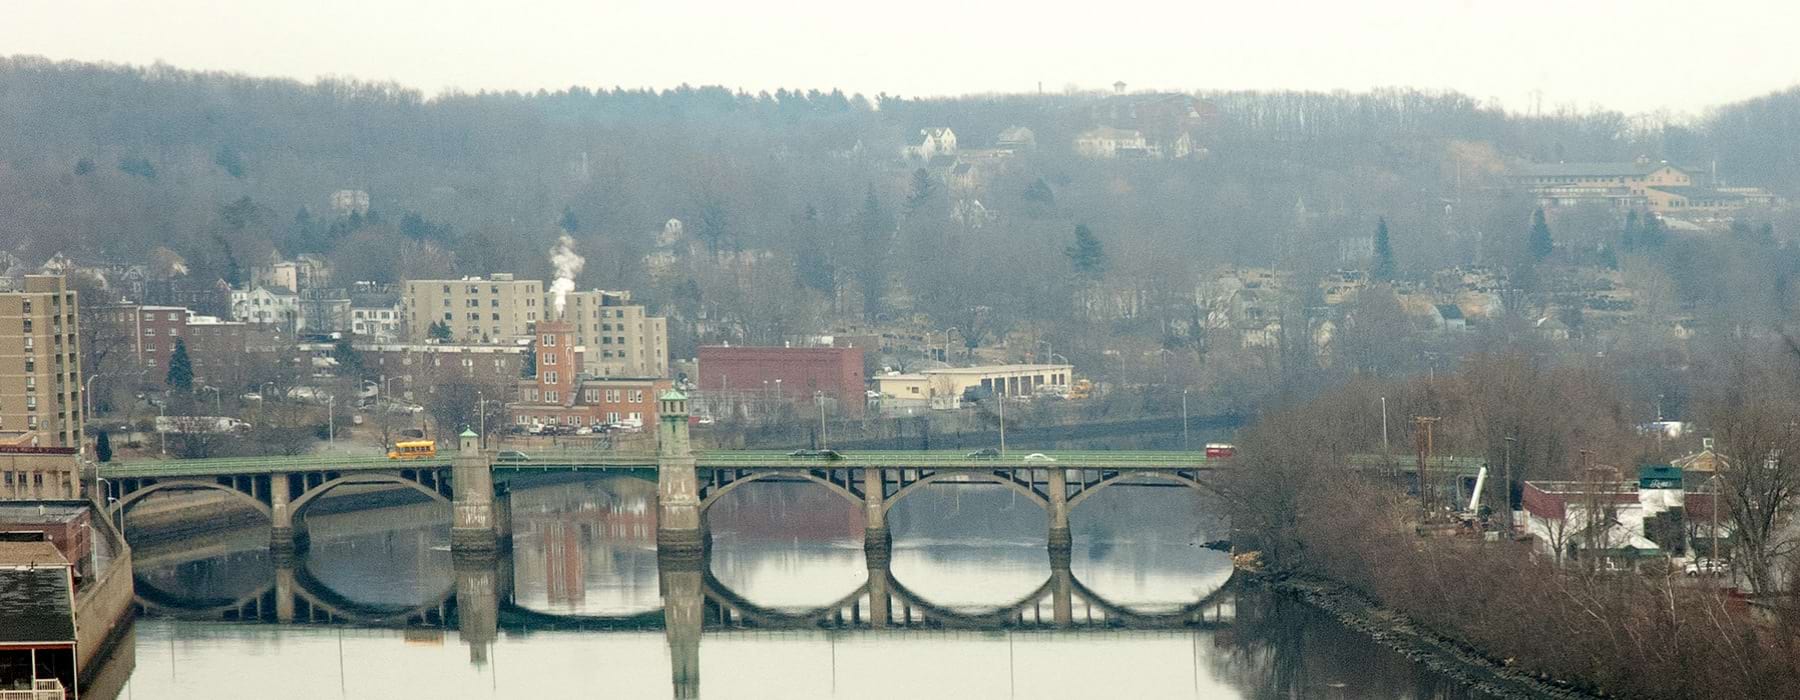 A long bridge over a still river in the downtown of Haverhill, MA